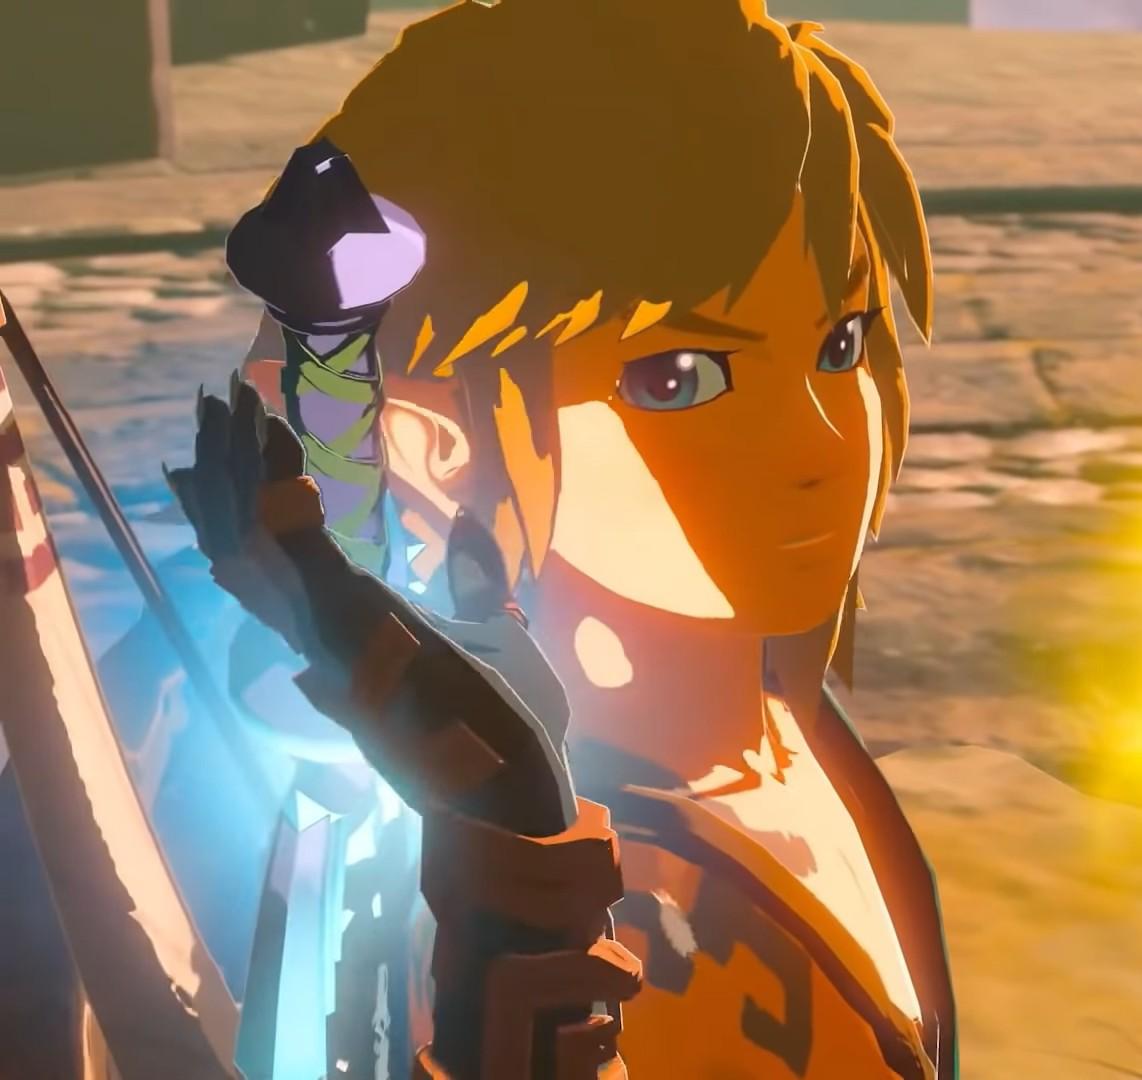 Contrary to what many fans speculated, only Link's right arm was affected by the corrupted energy.